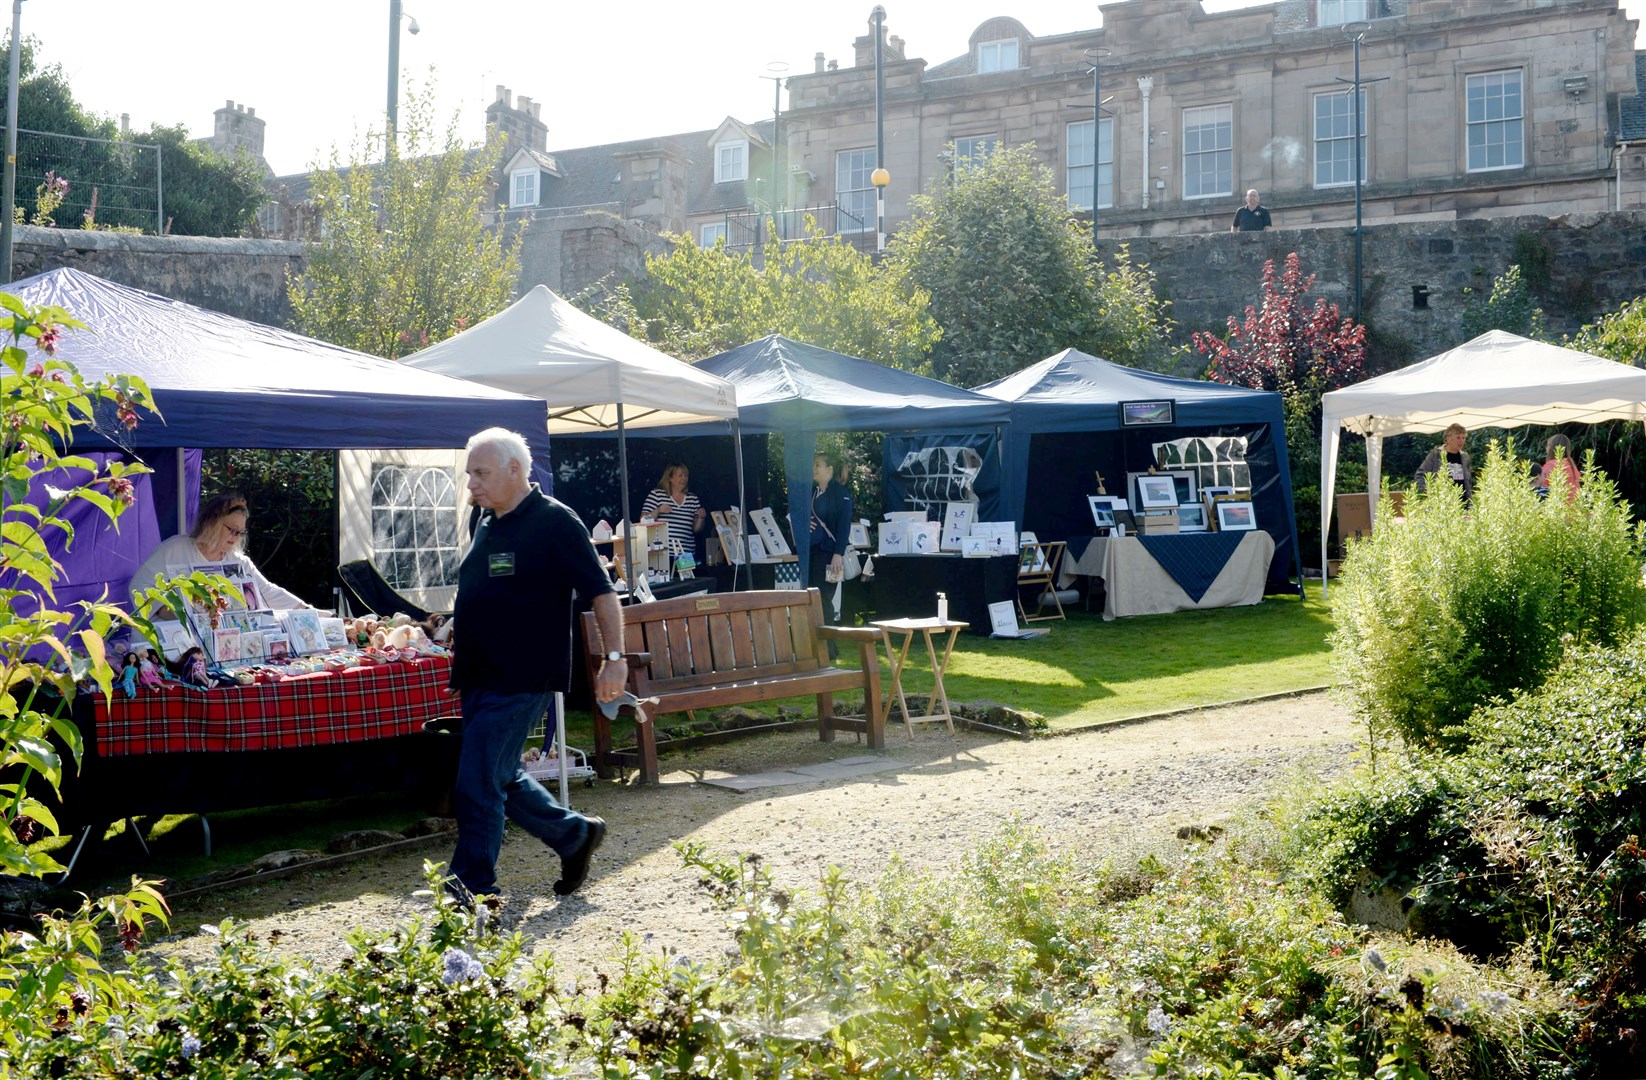 The Tain Community Market back in September was held in the town's Rose Garden. Picture: James Mackenzie